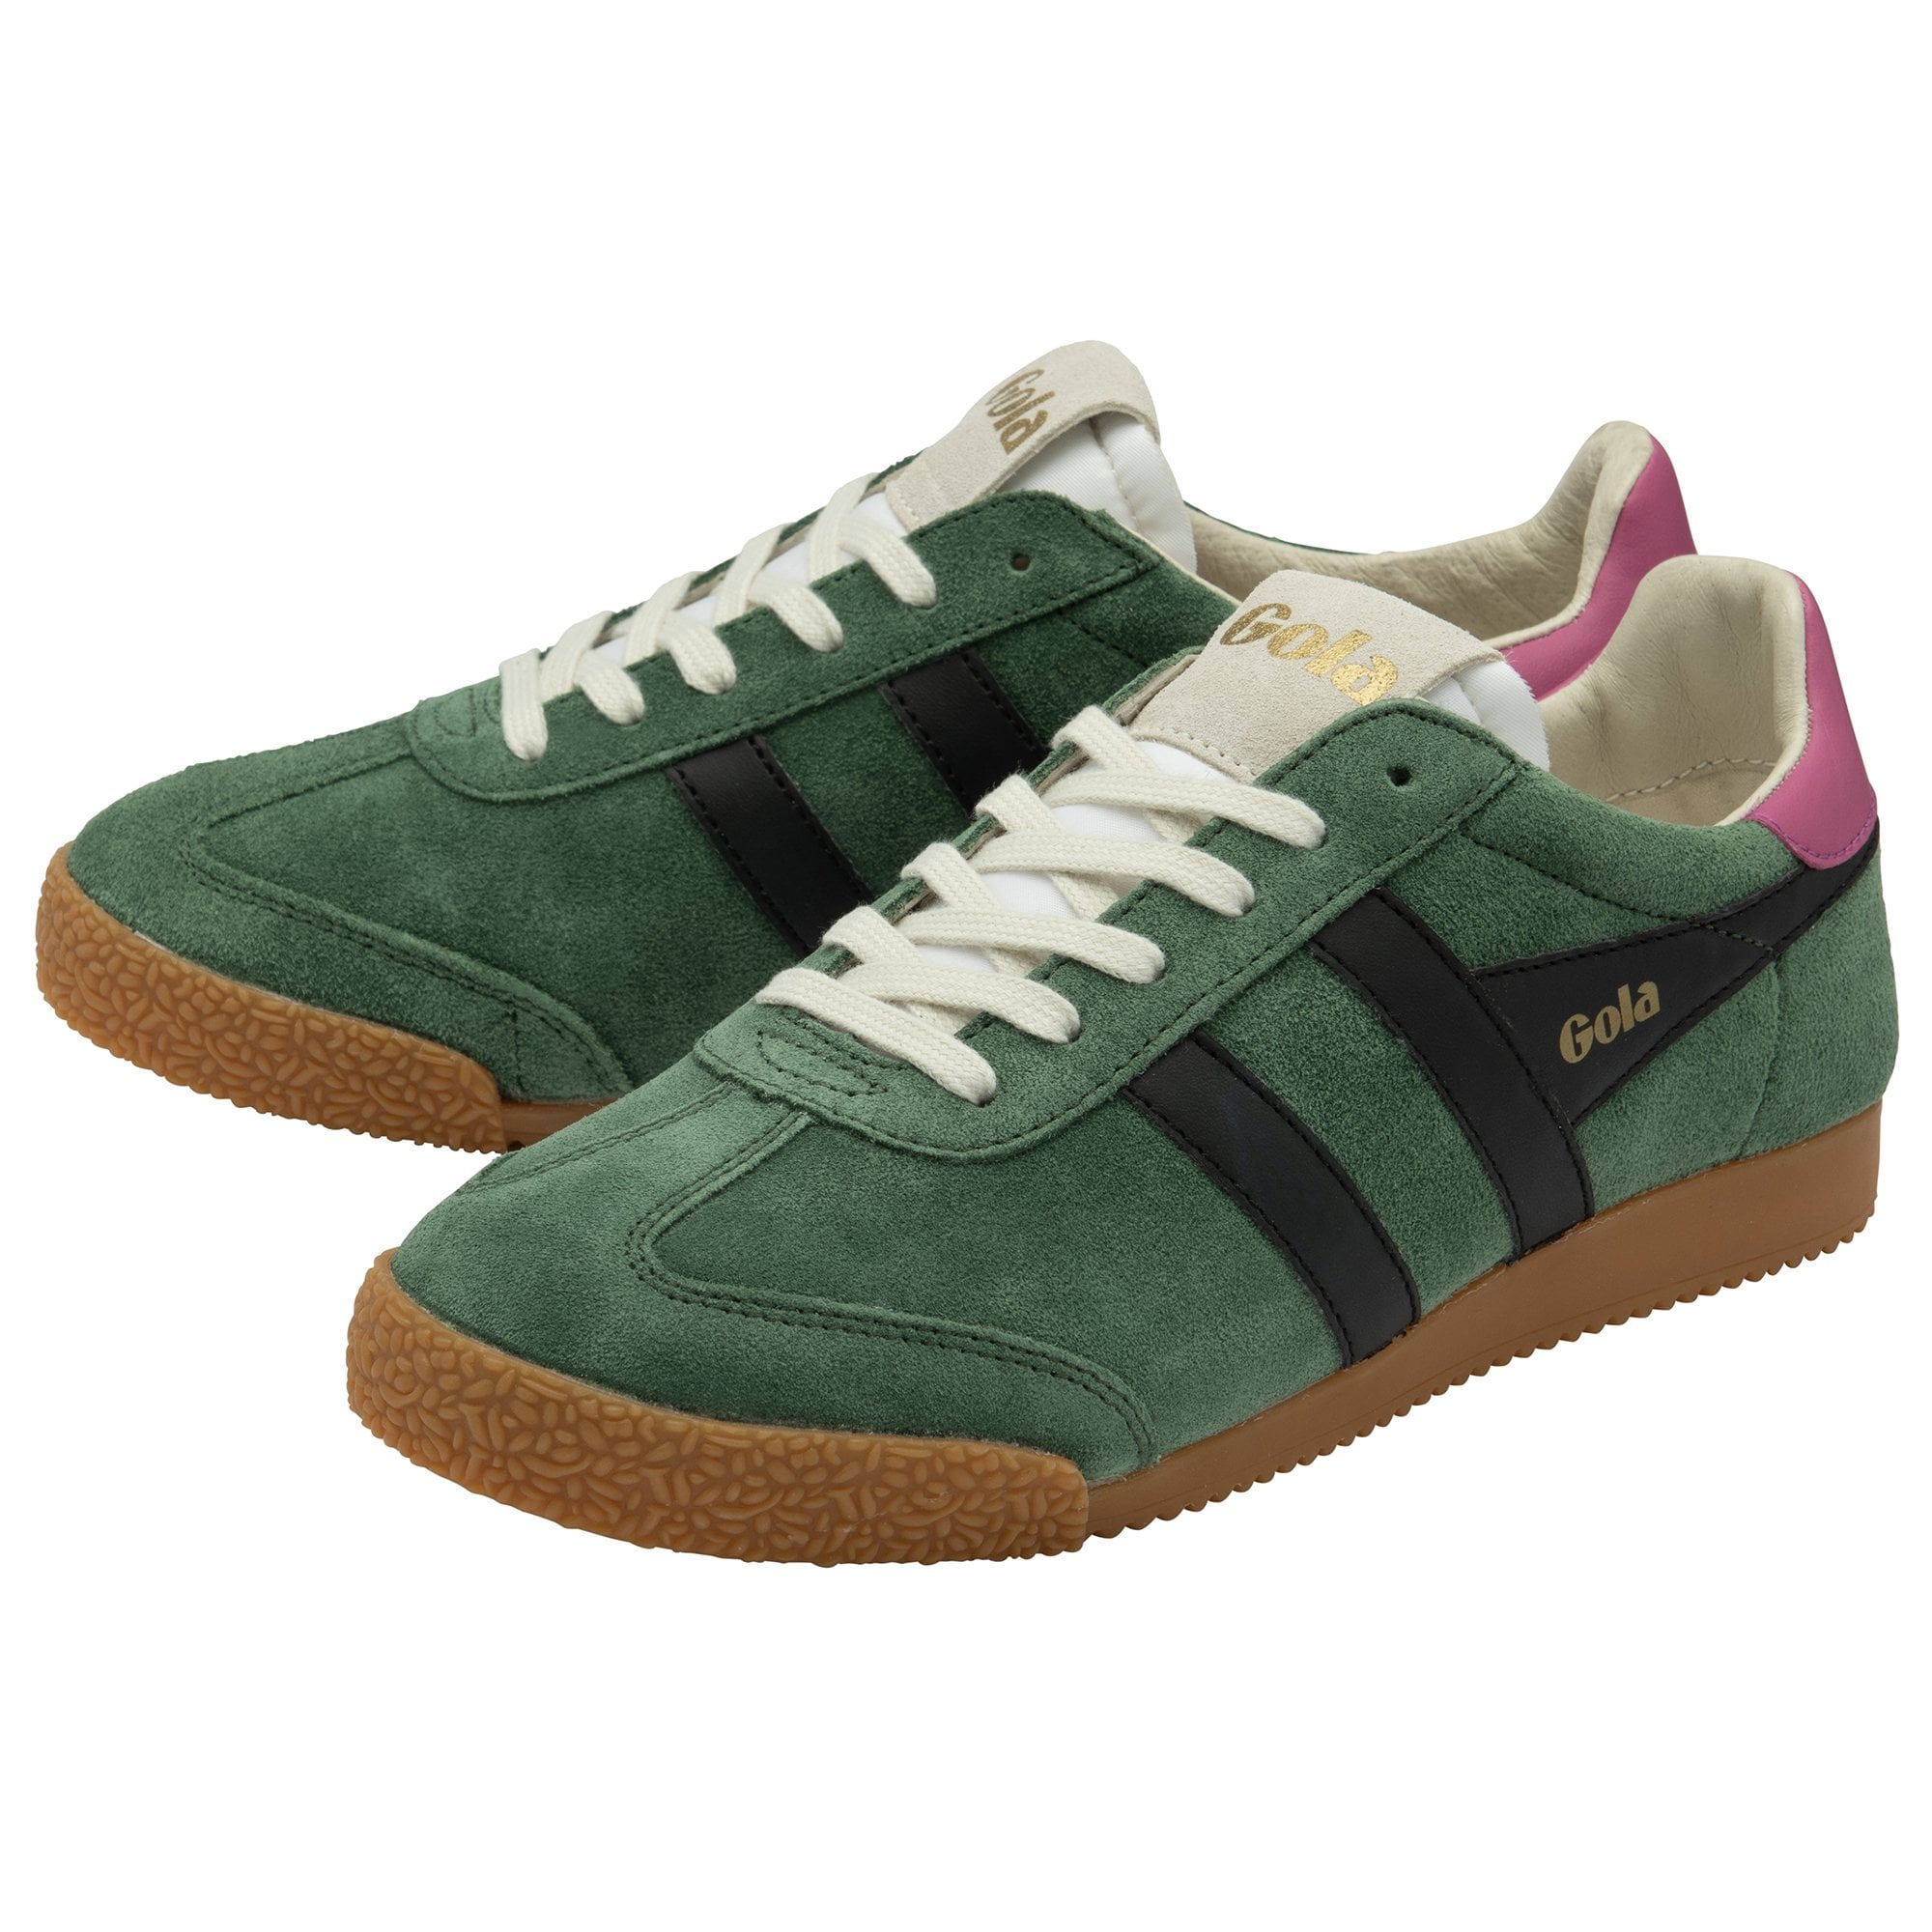 Gola Elan Ladies Green Leather Lace Up Trainers